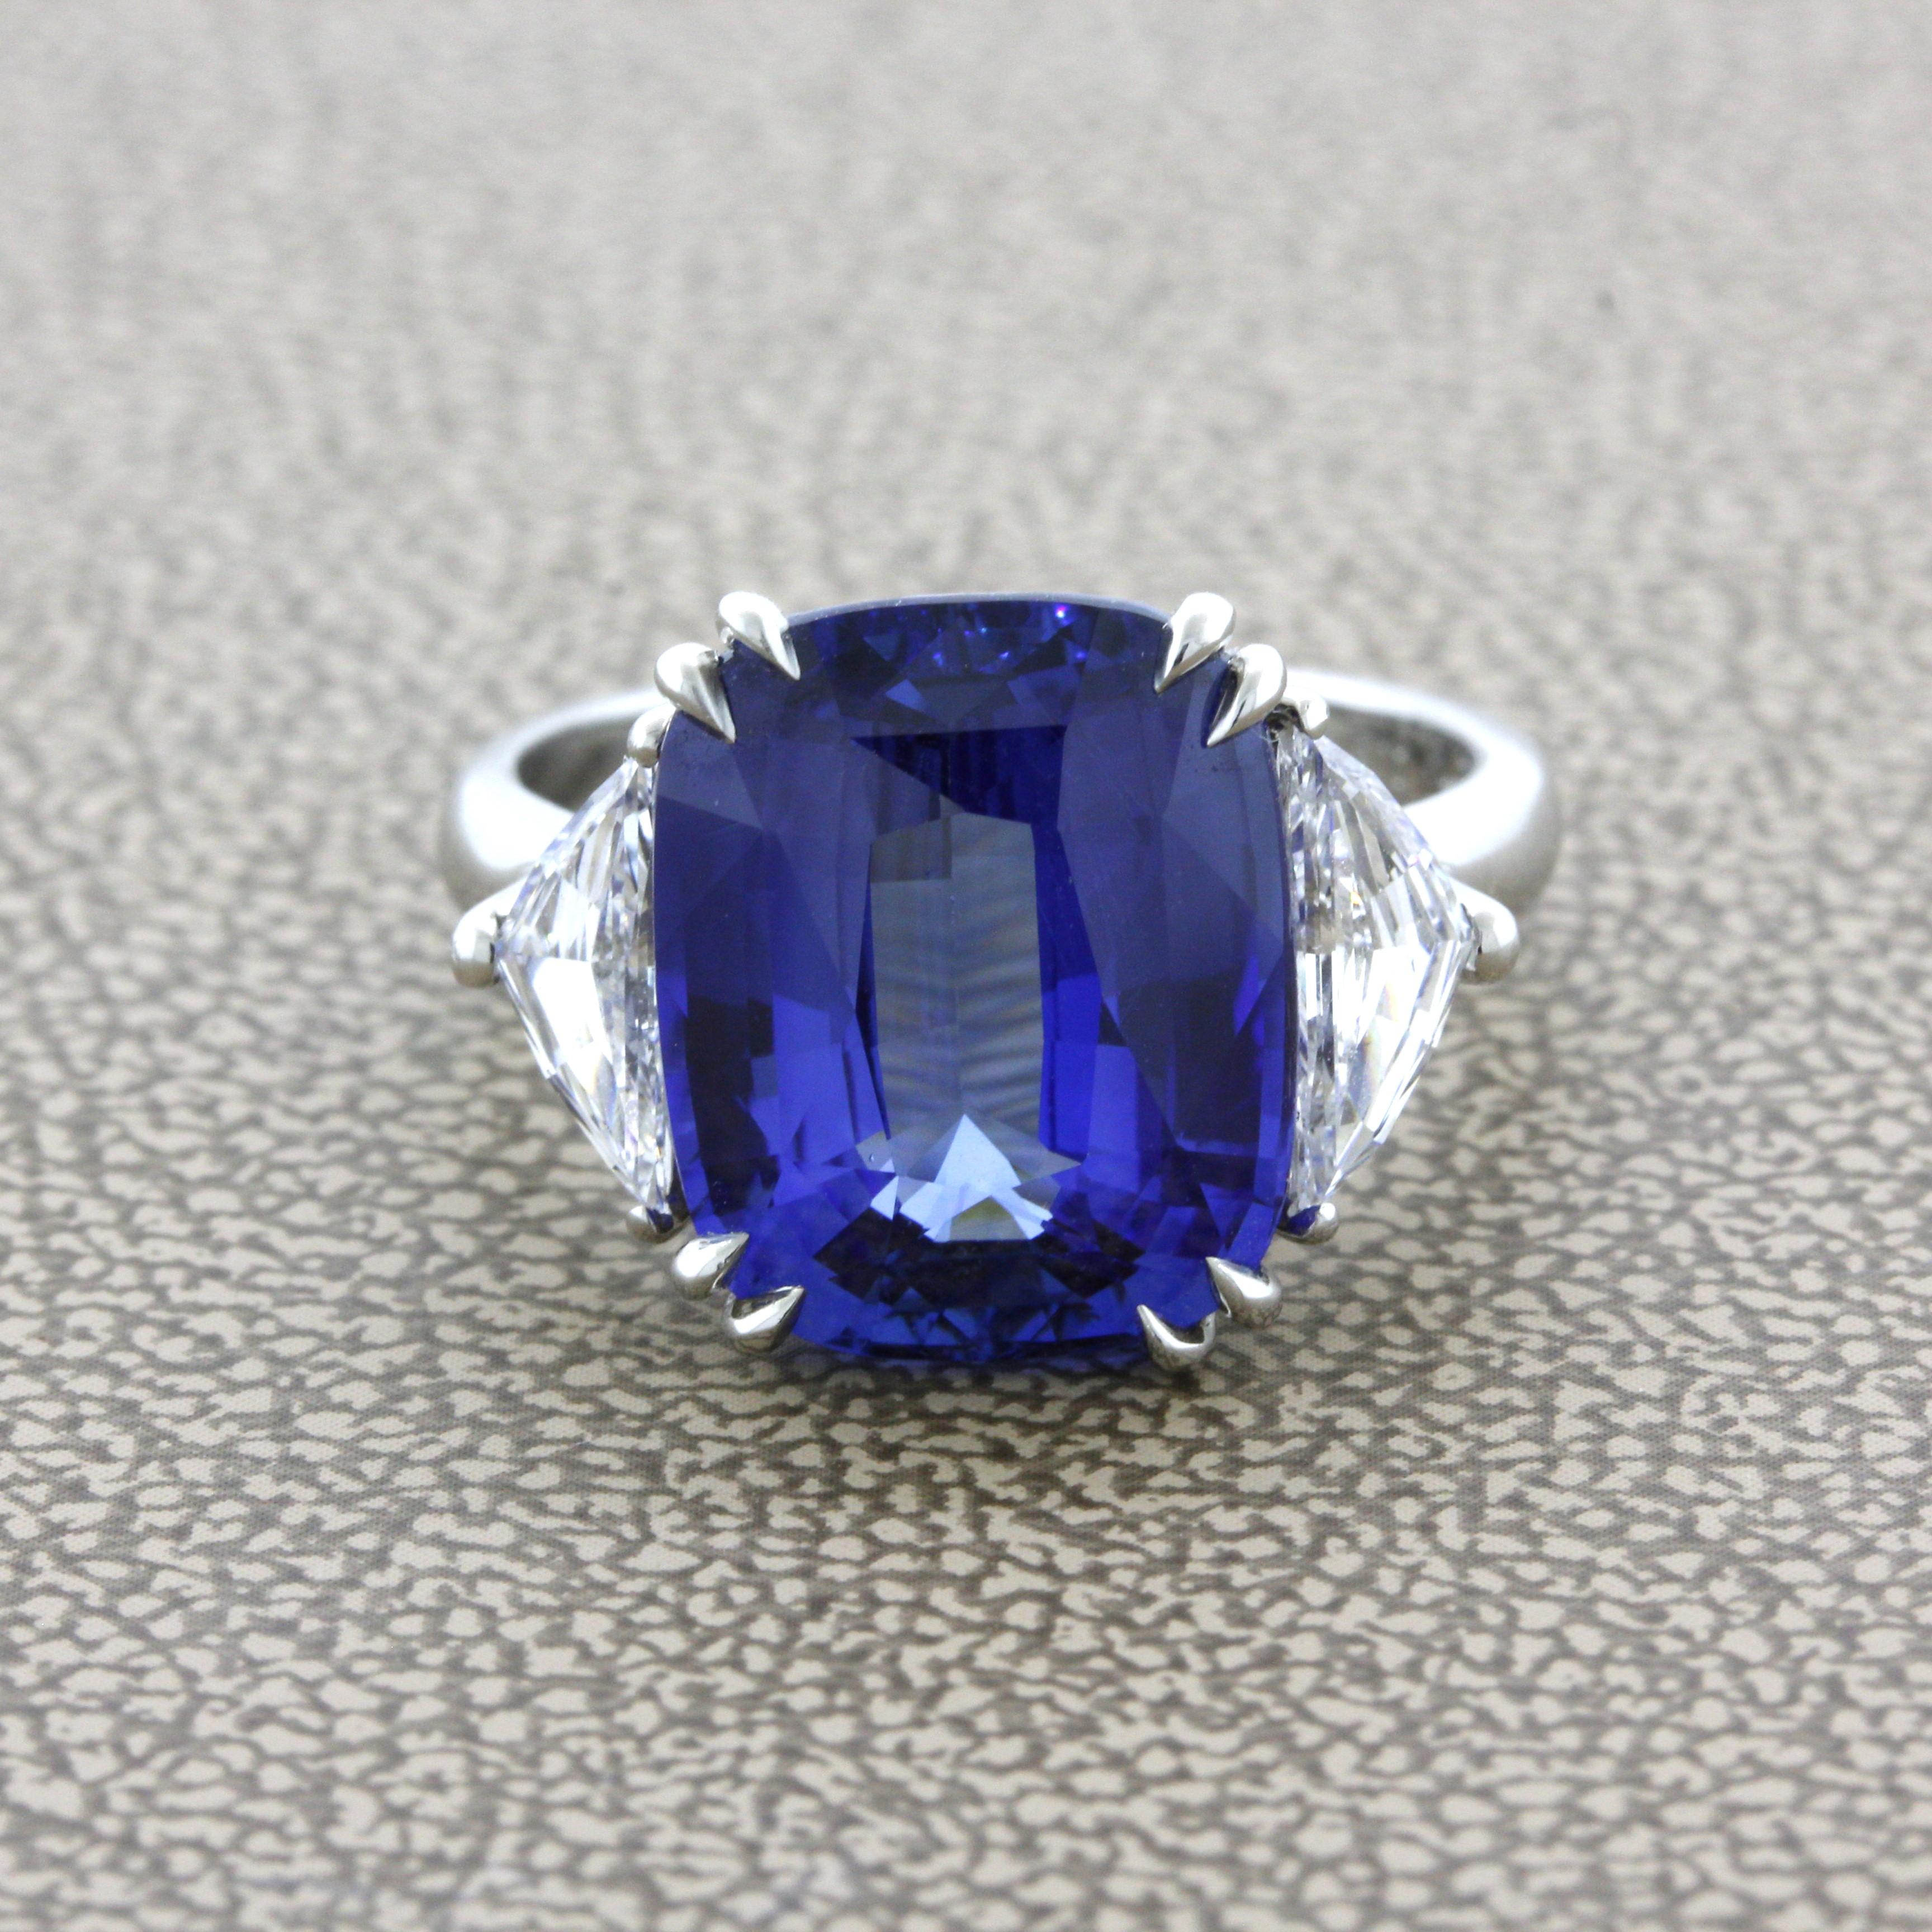 A beautiful and rare sapphire takes center stage weighing an impressive 10.10 carats! It has a rich and vibrant blue color with a clean crystal allowing the stones color to shine brightly. Adding to that it is certified by the GIA as natural and